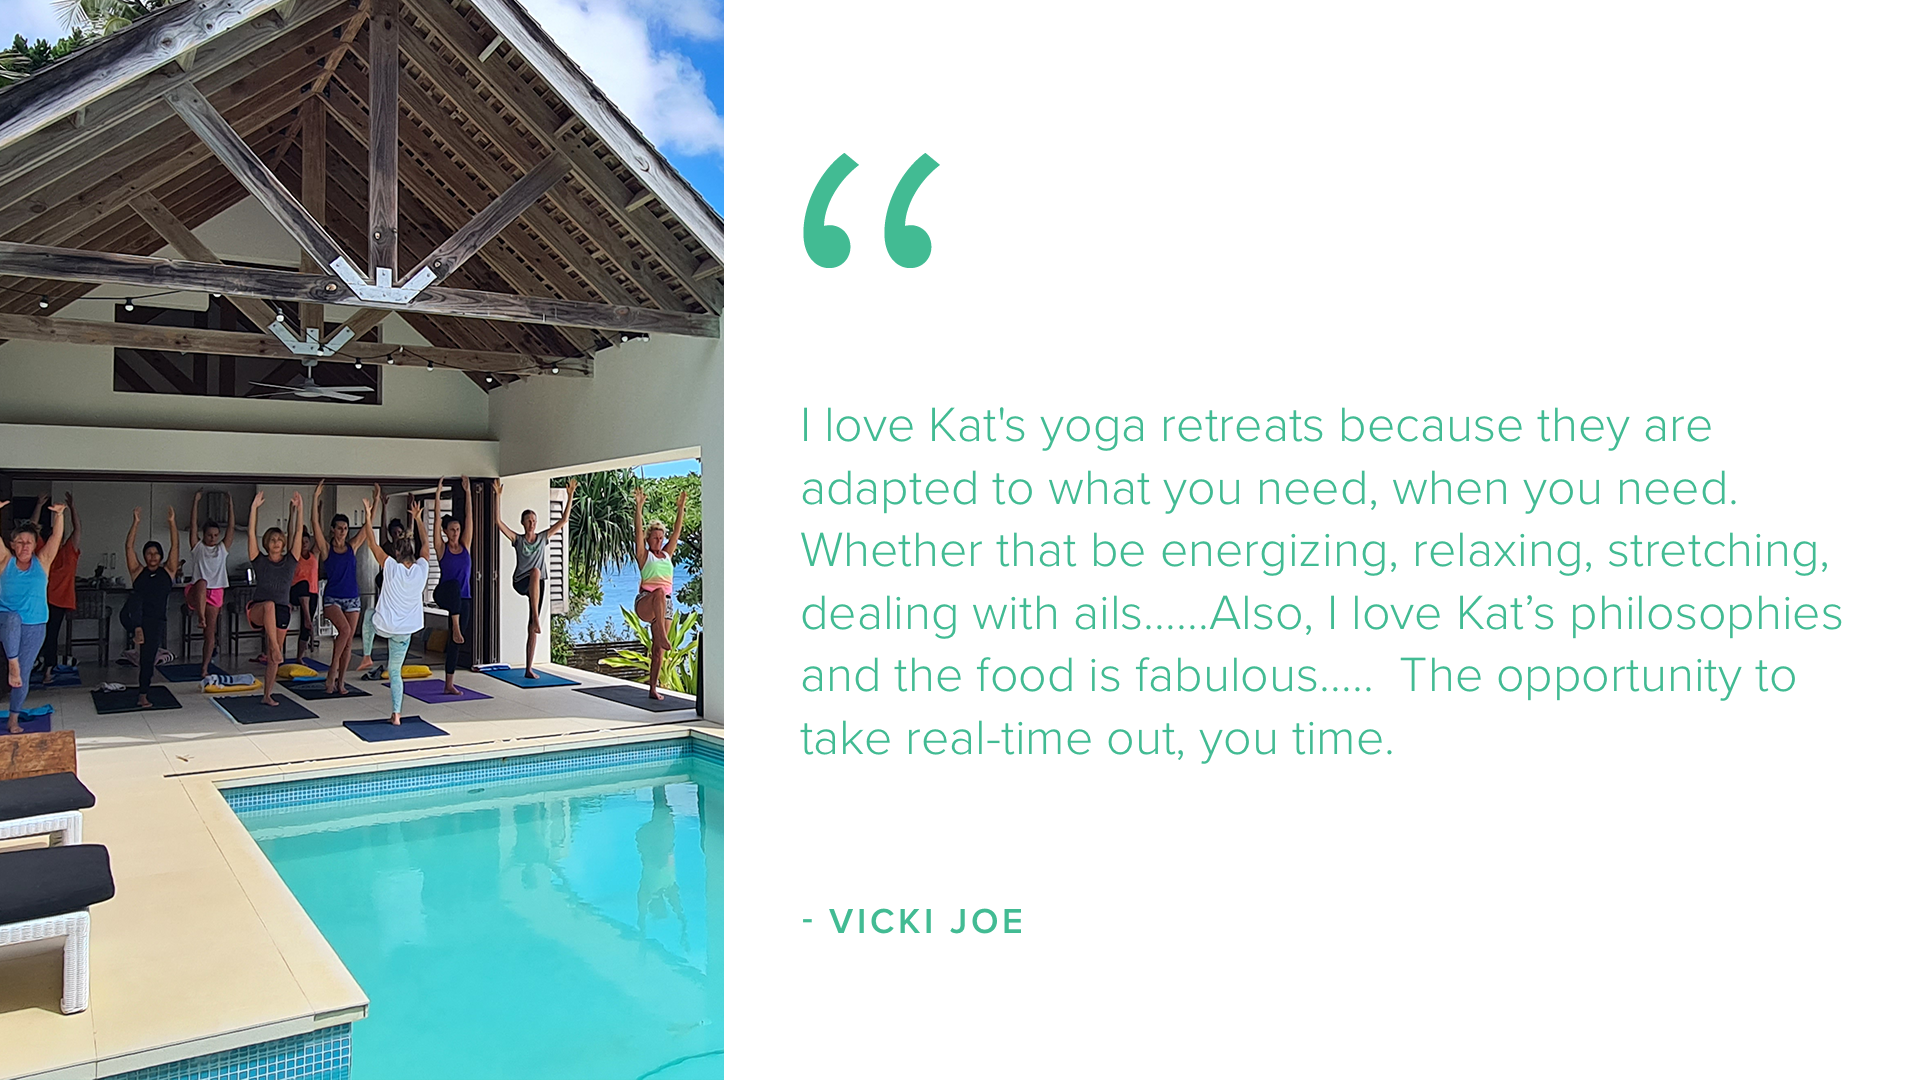 I love Kat's yoga retreats because they are adapted to what you need, when you need.